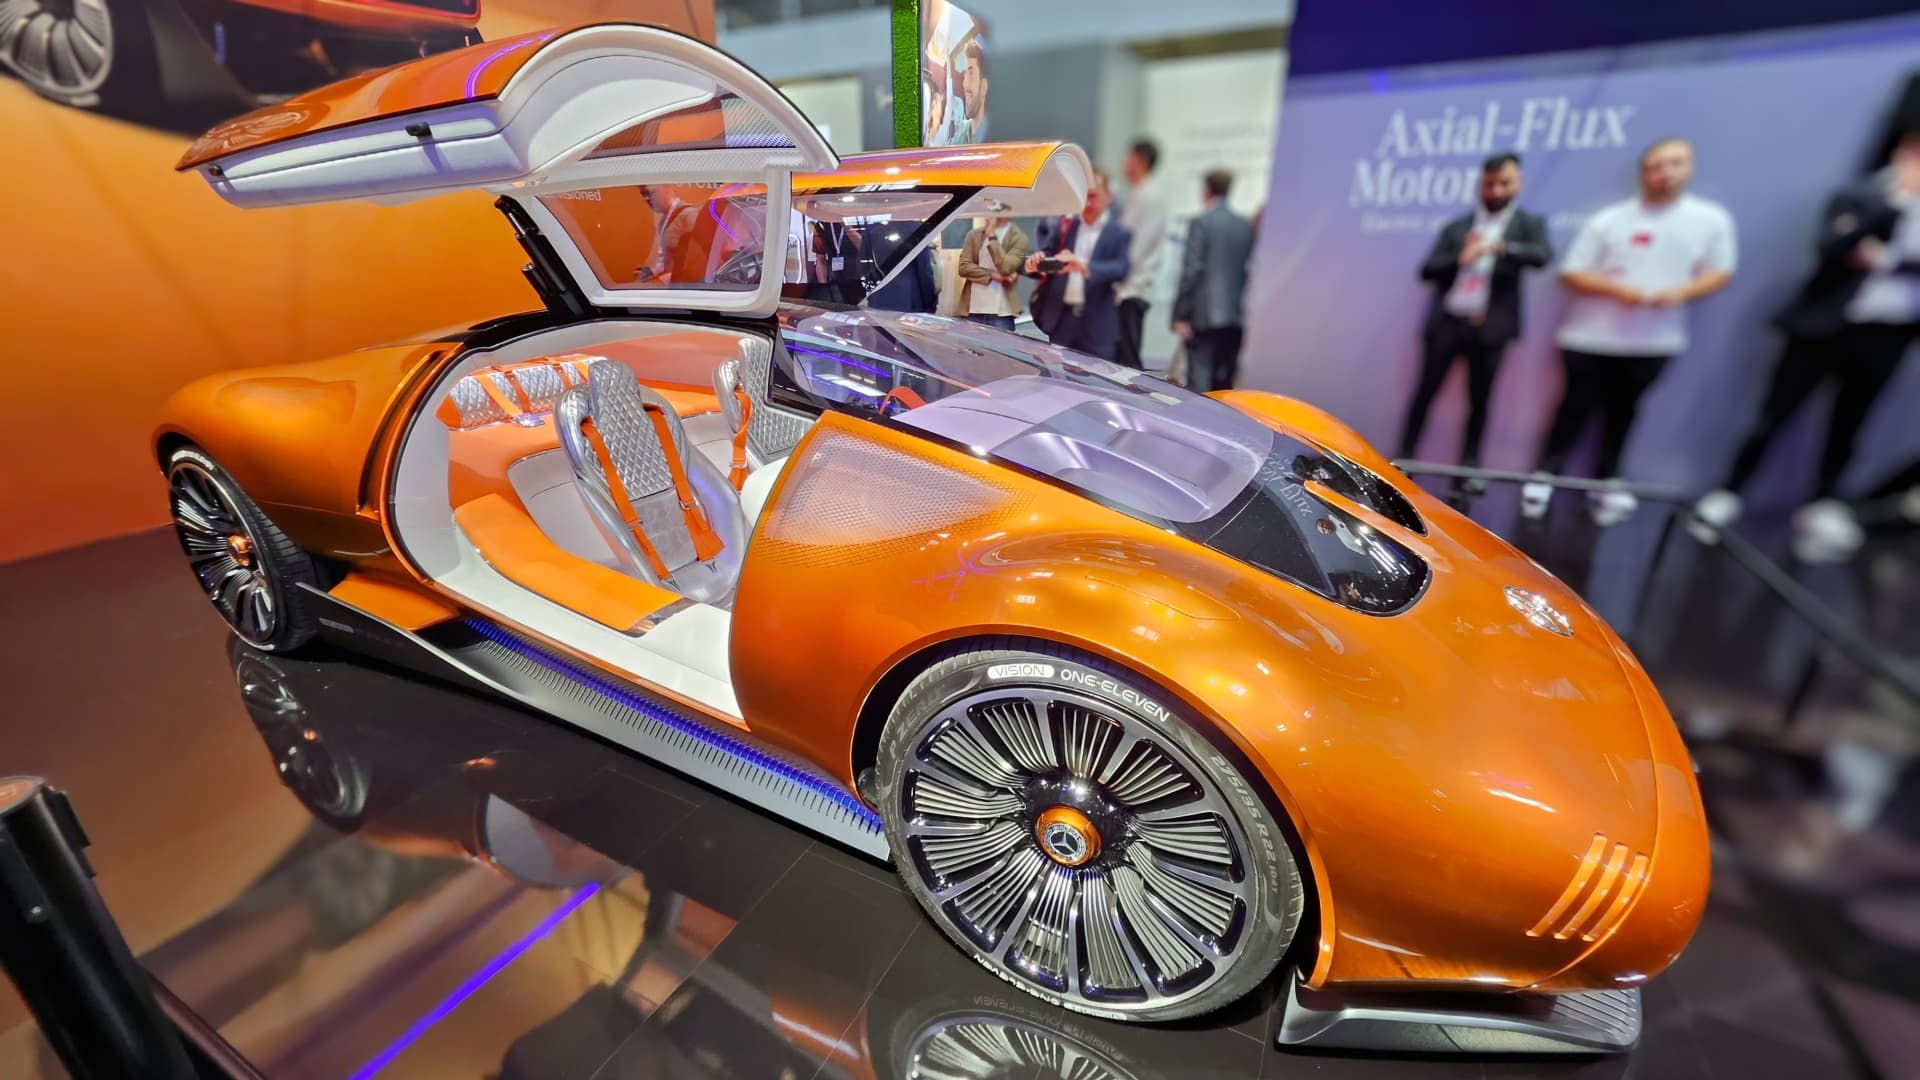 From BMW to Porsche: Take a look at the cars on display at one of the world’s biggest auto shows